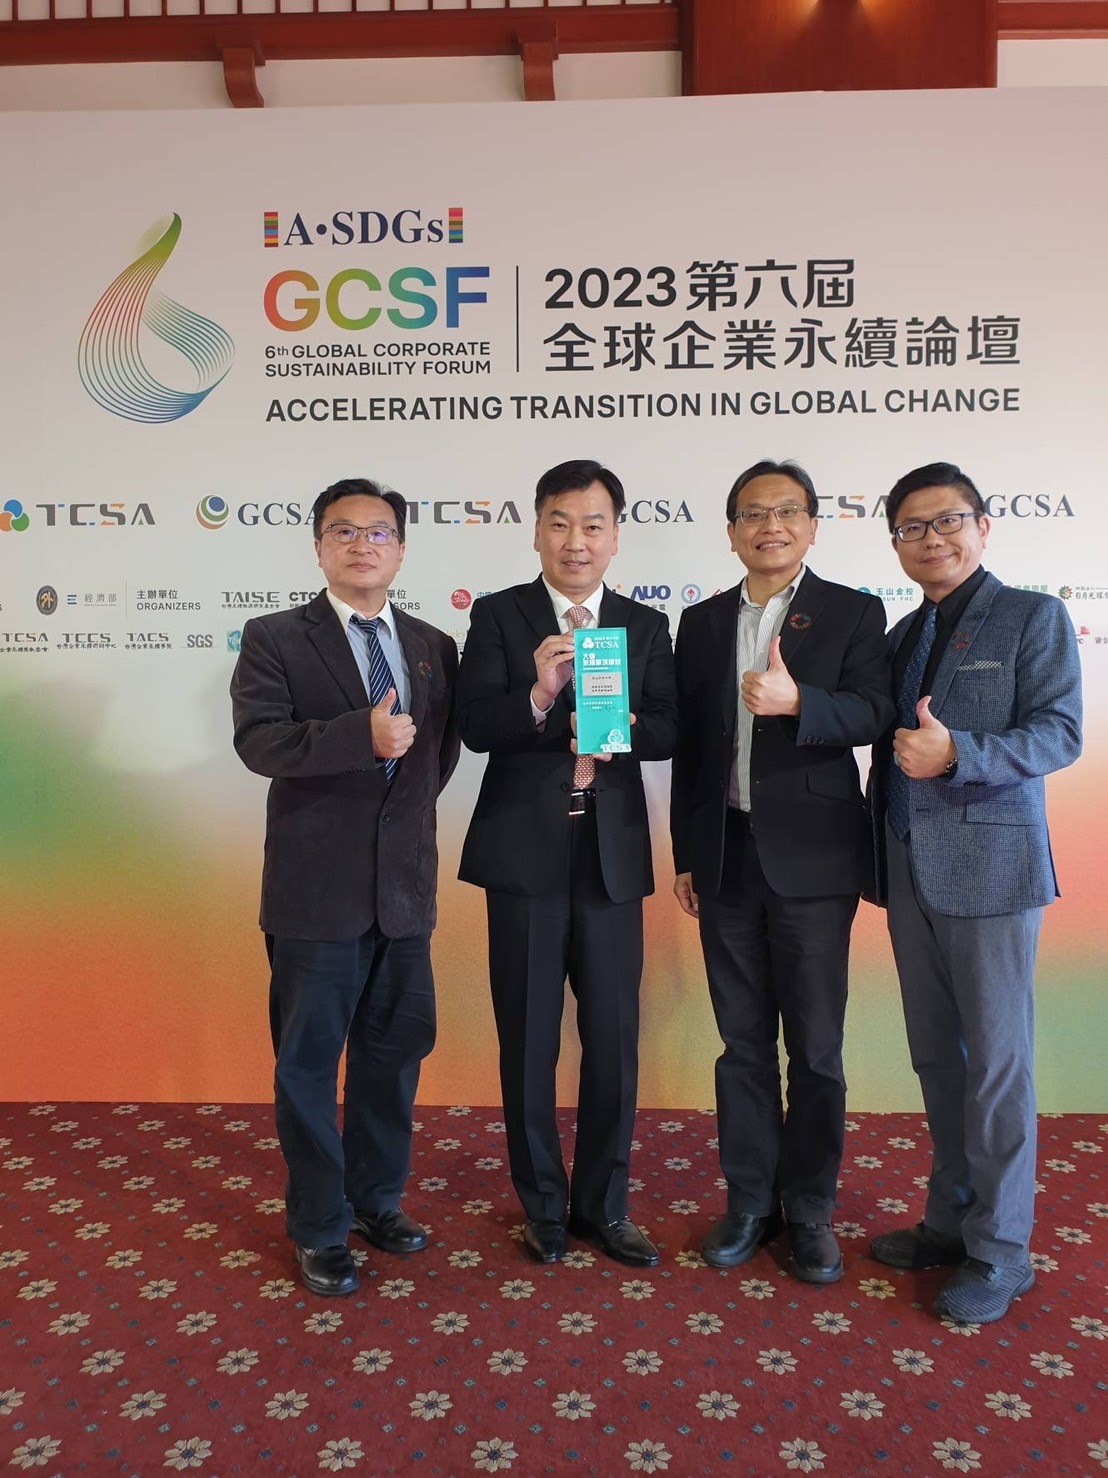 02.KSU Secures Second Consecutive Title as 2023 World Green University – Tops Among Private Universities in Central and Southern Taiwan